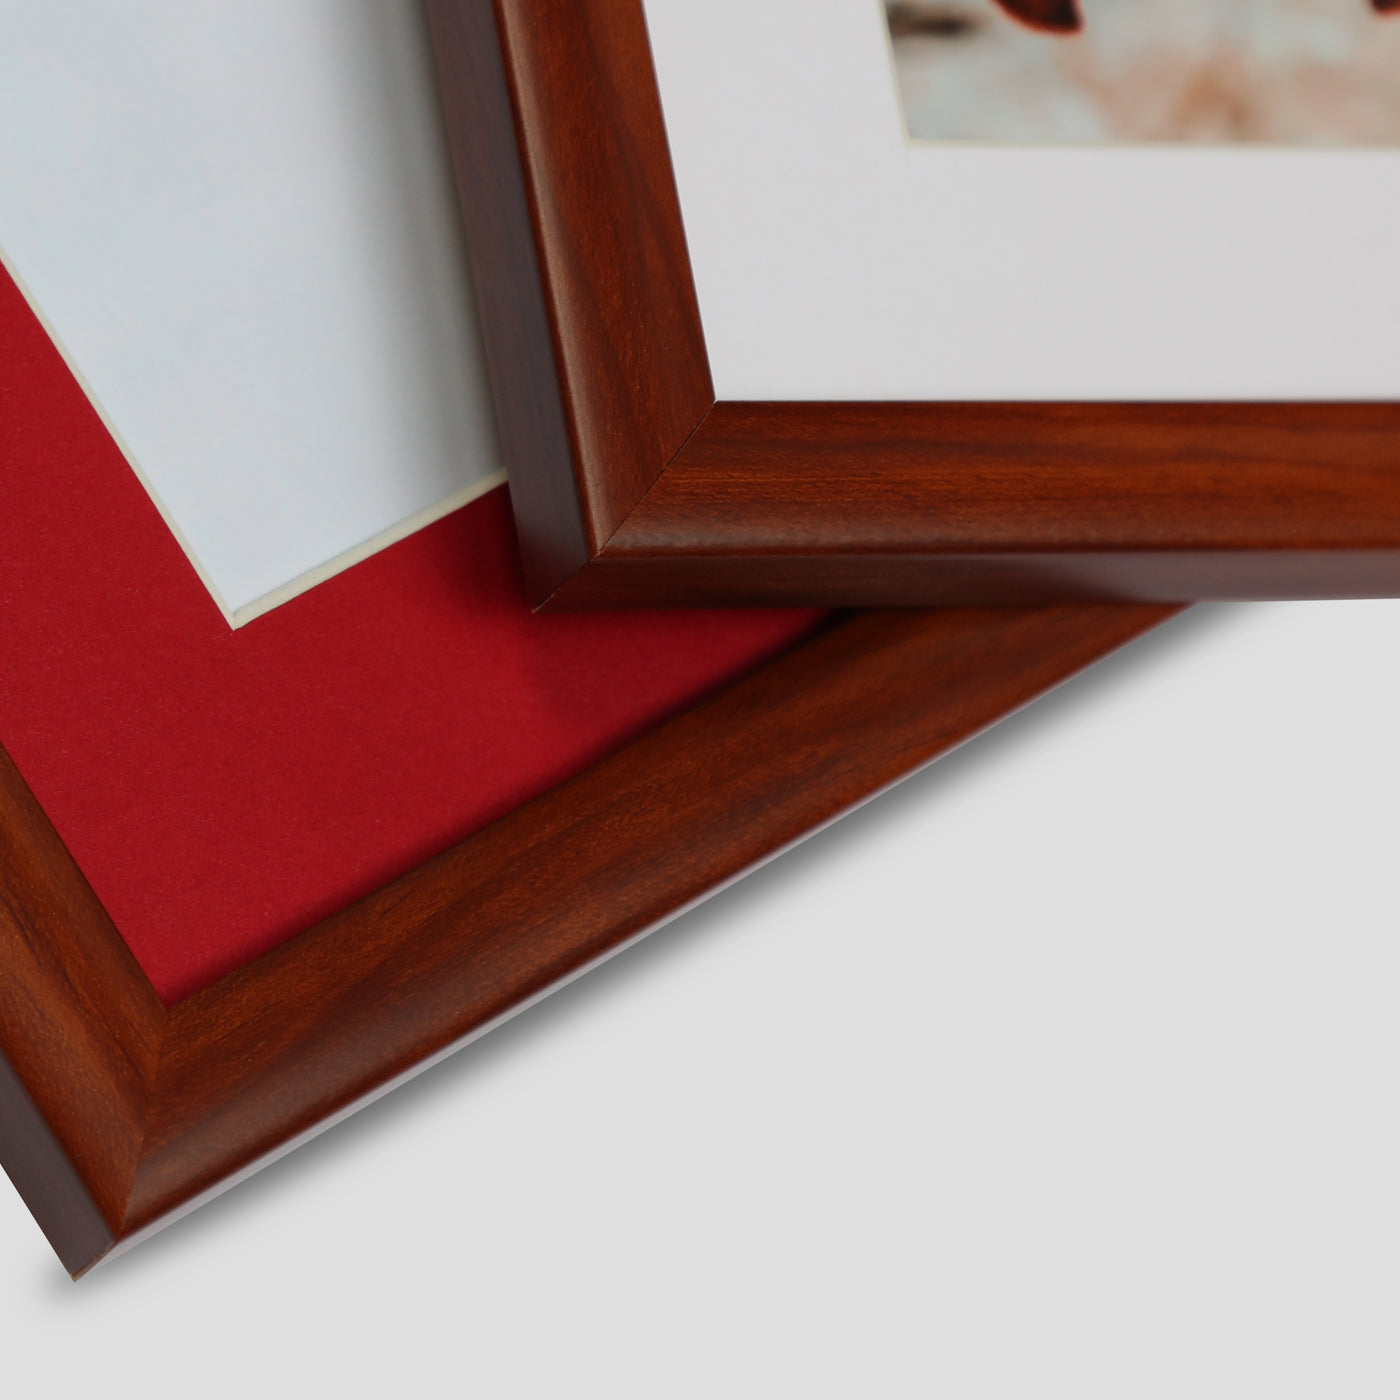 Thin Cushioned Brown Triple Photo Frame in 5x3.5, 6x4 & 7x5 - Free Delivery